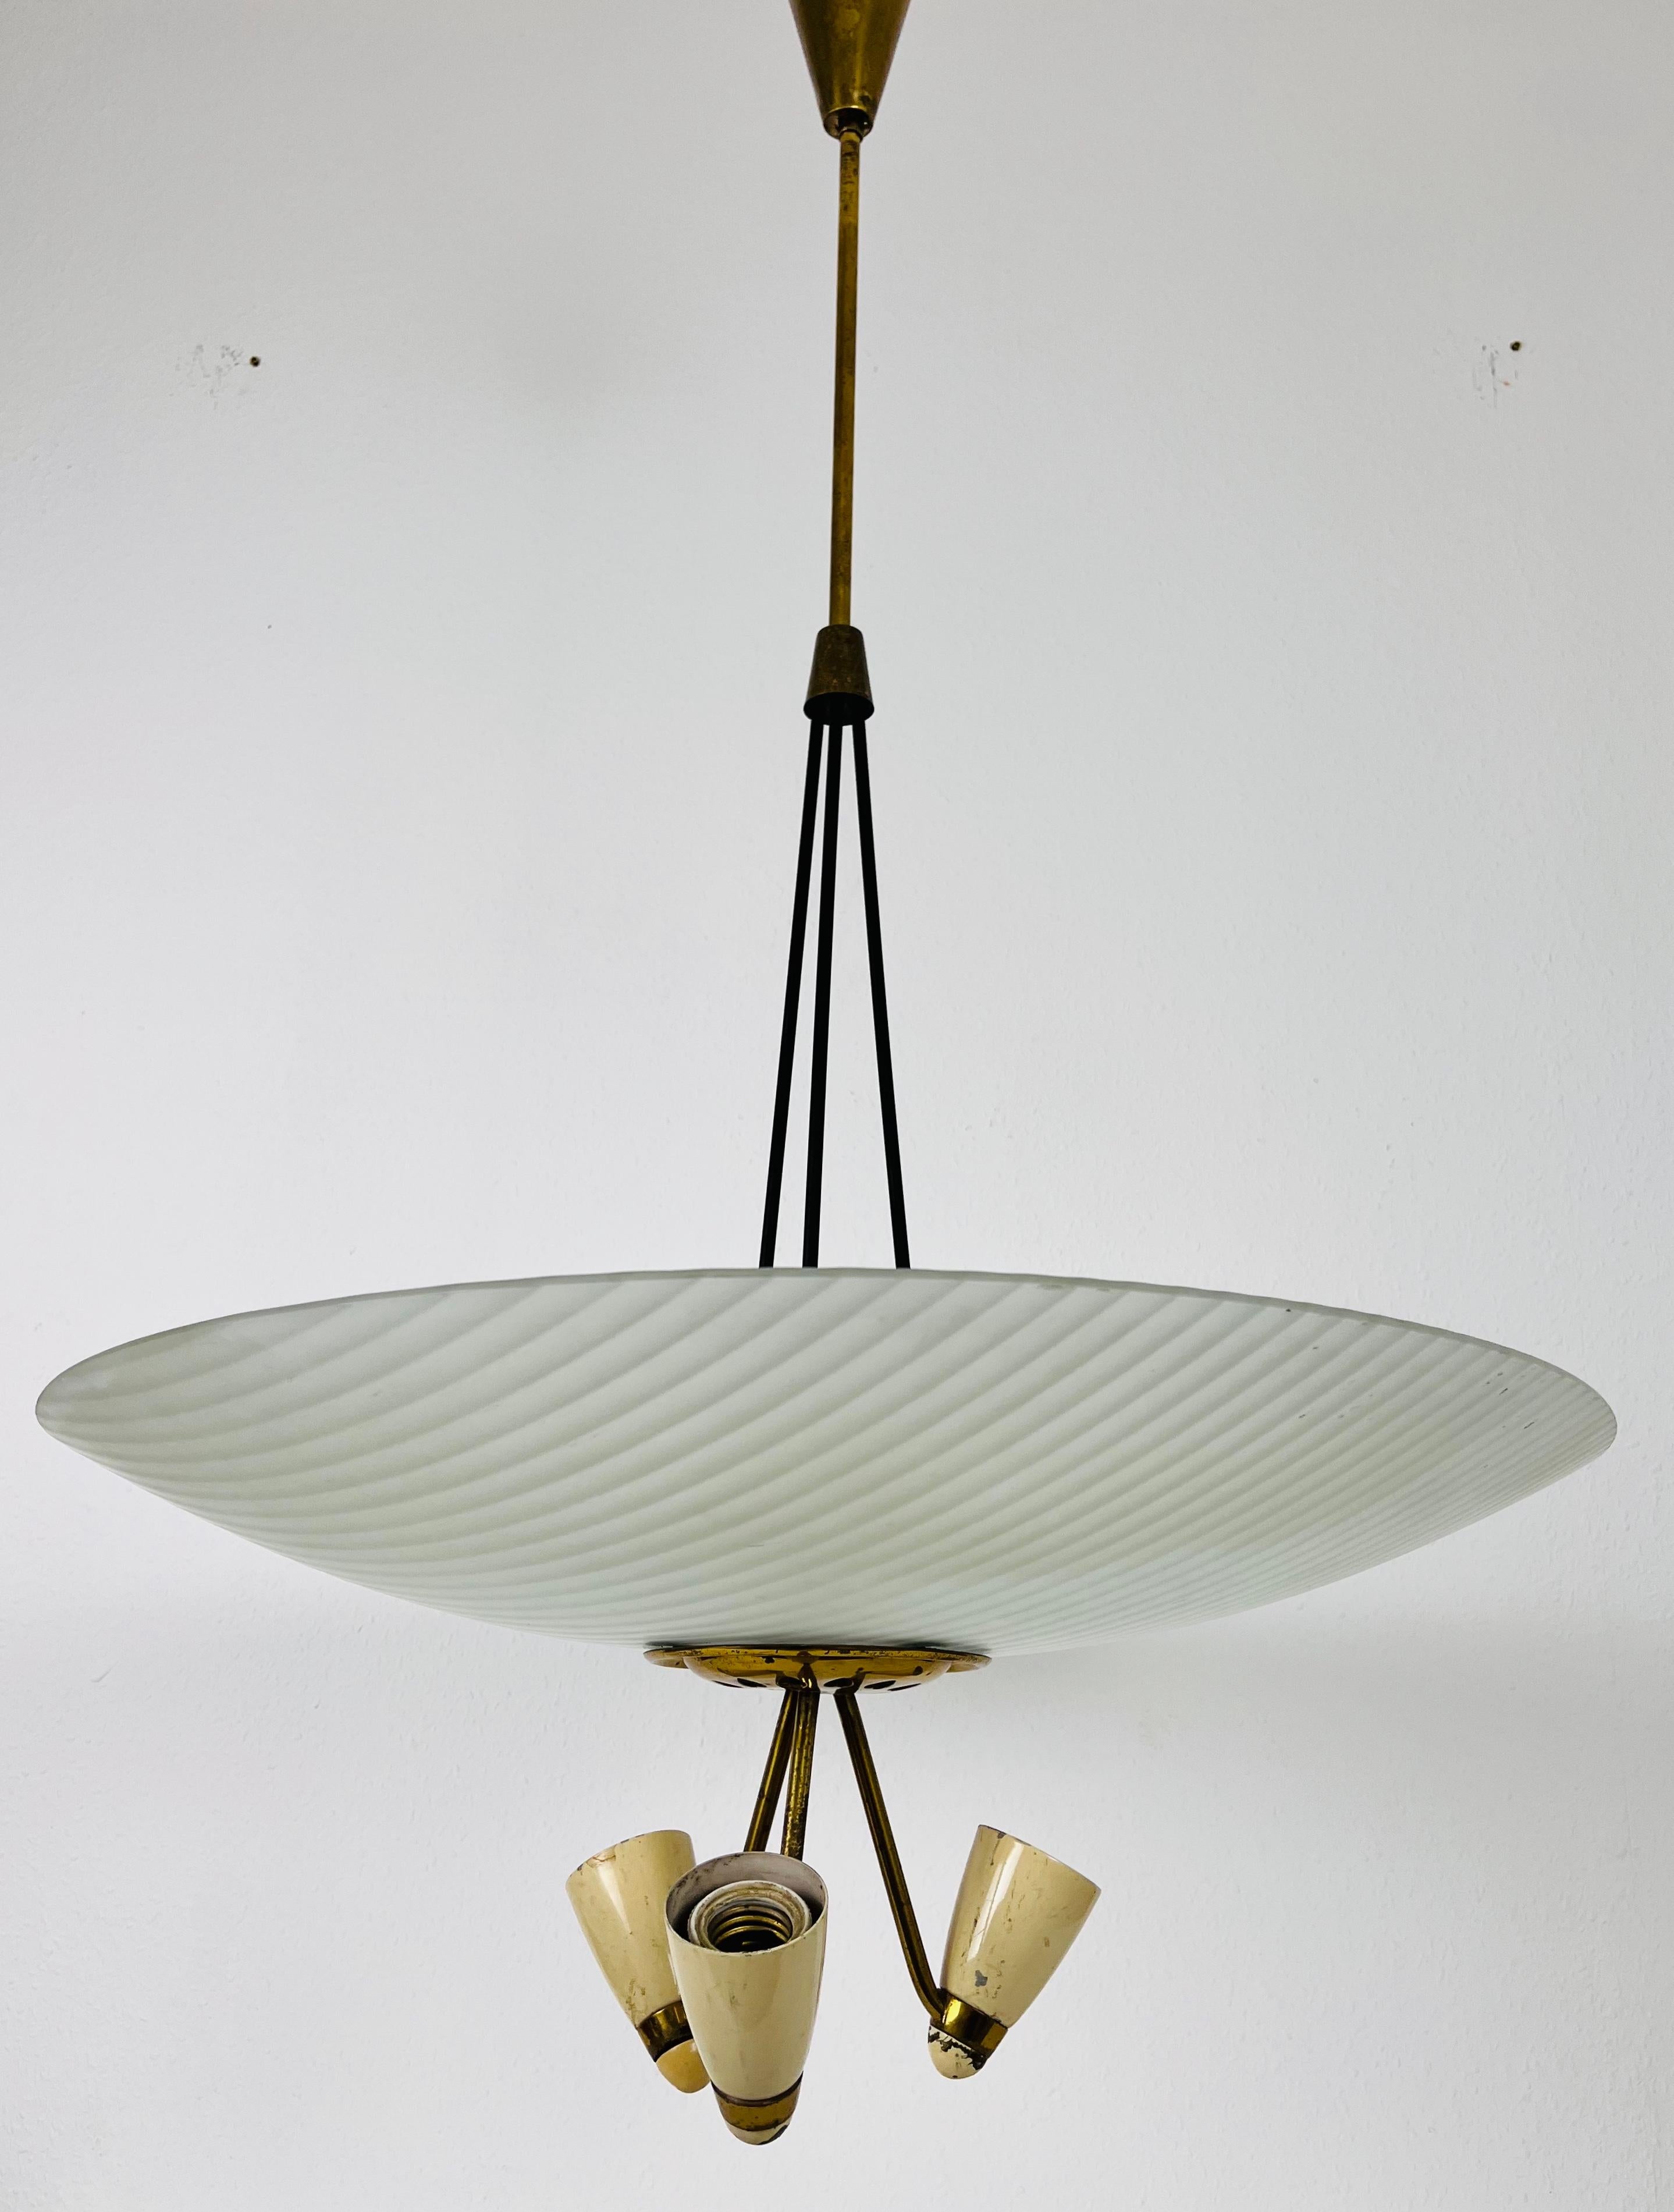 Italian Midcentury Brass and Glass Chandelier, 1950s For Sale 1